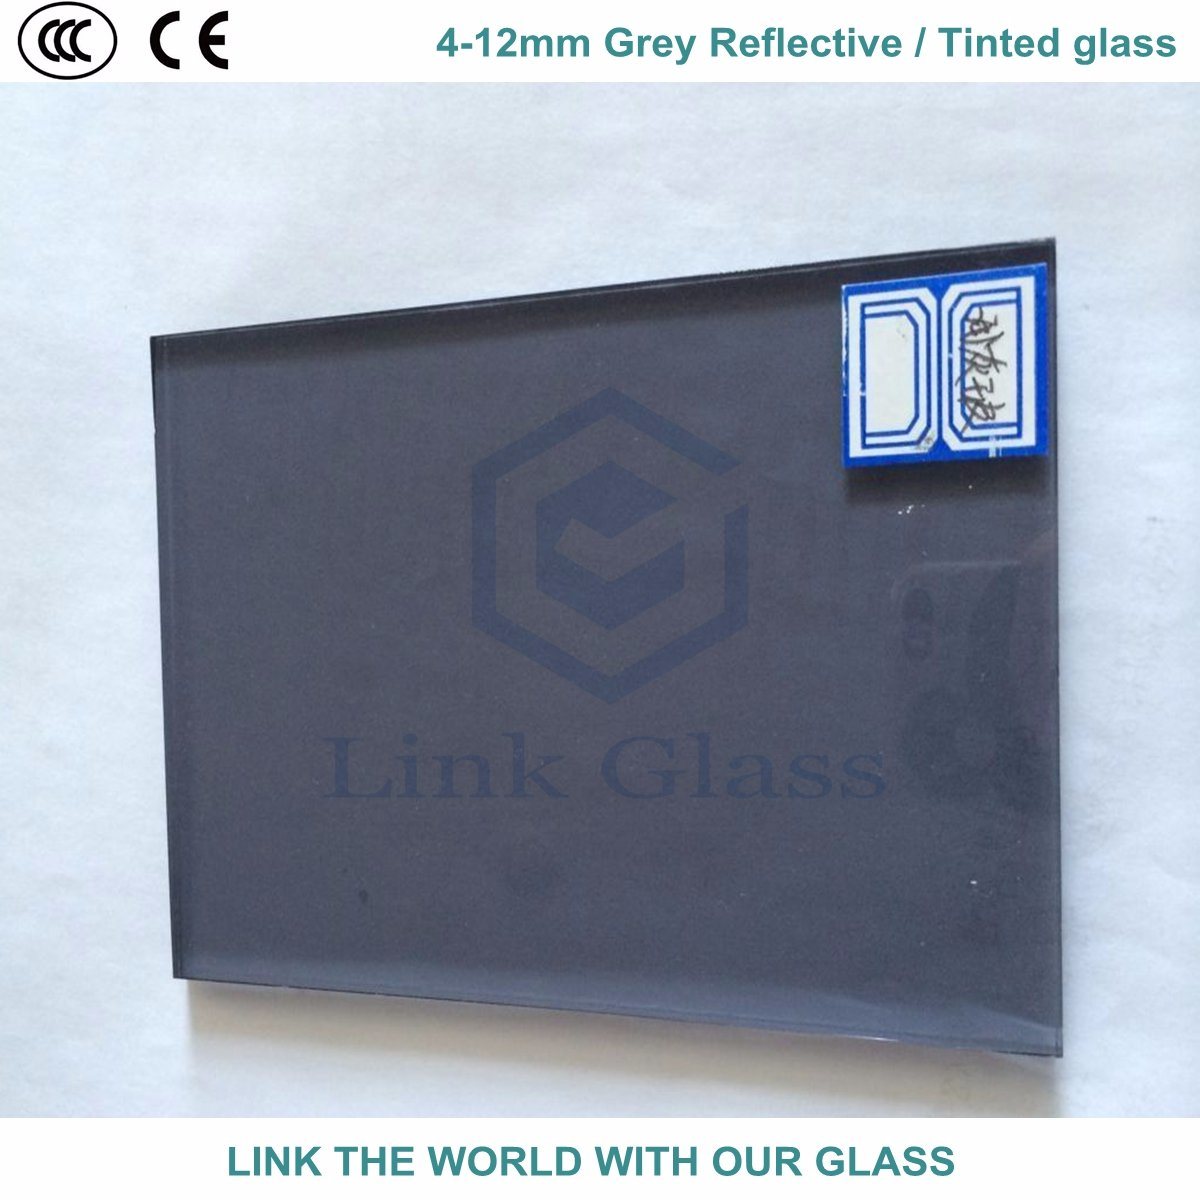 Euro Grey & Dark Grey Reflective / Tinted Glass with Ce & ISO9001 for Glass Window